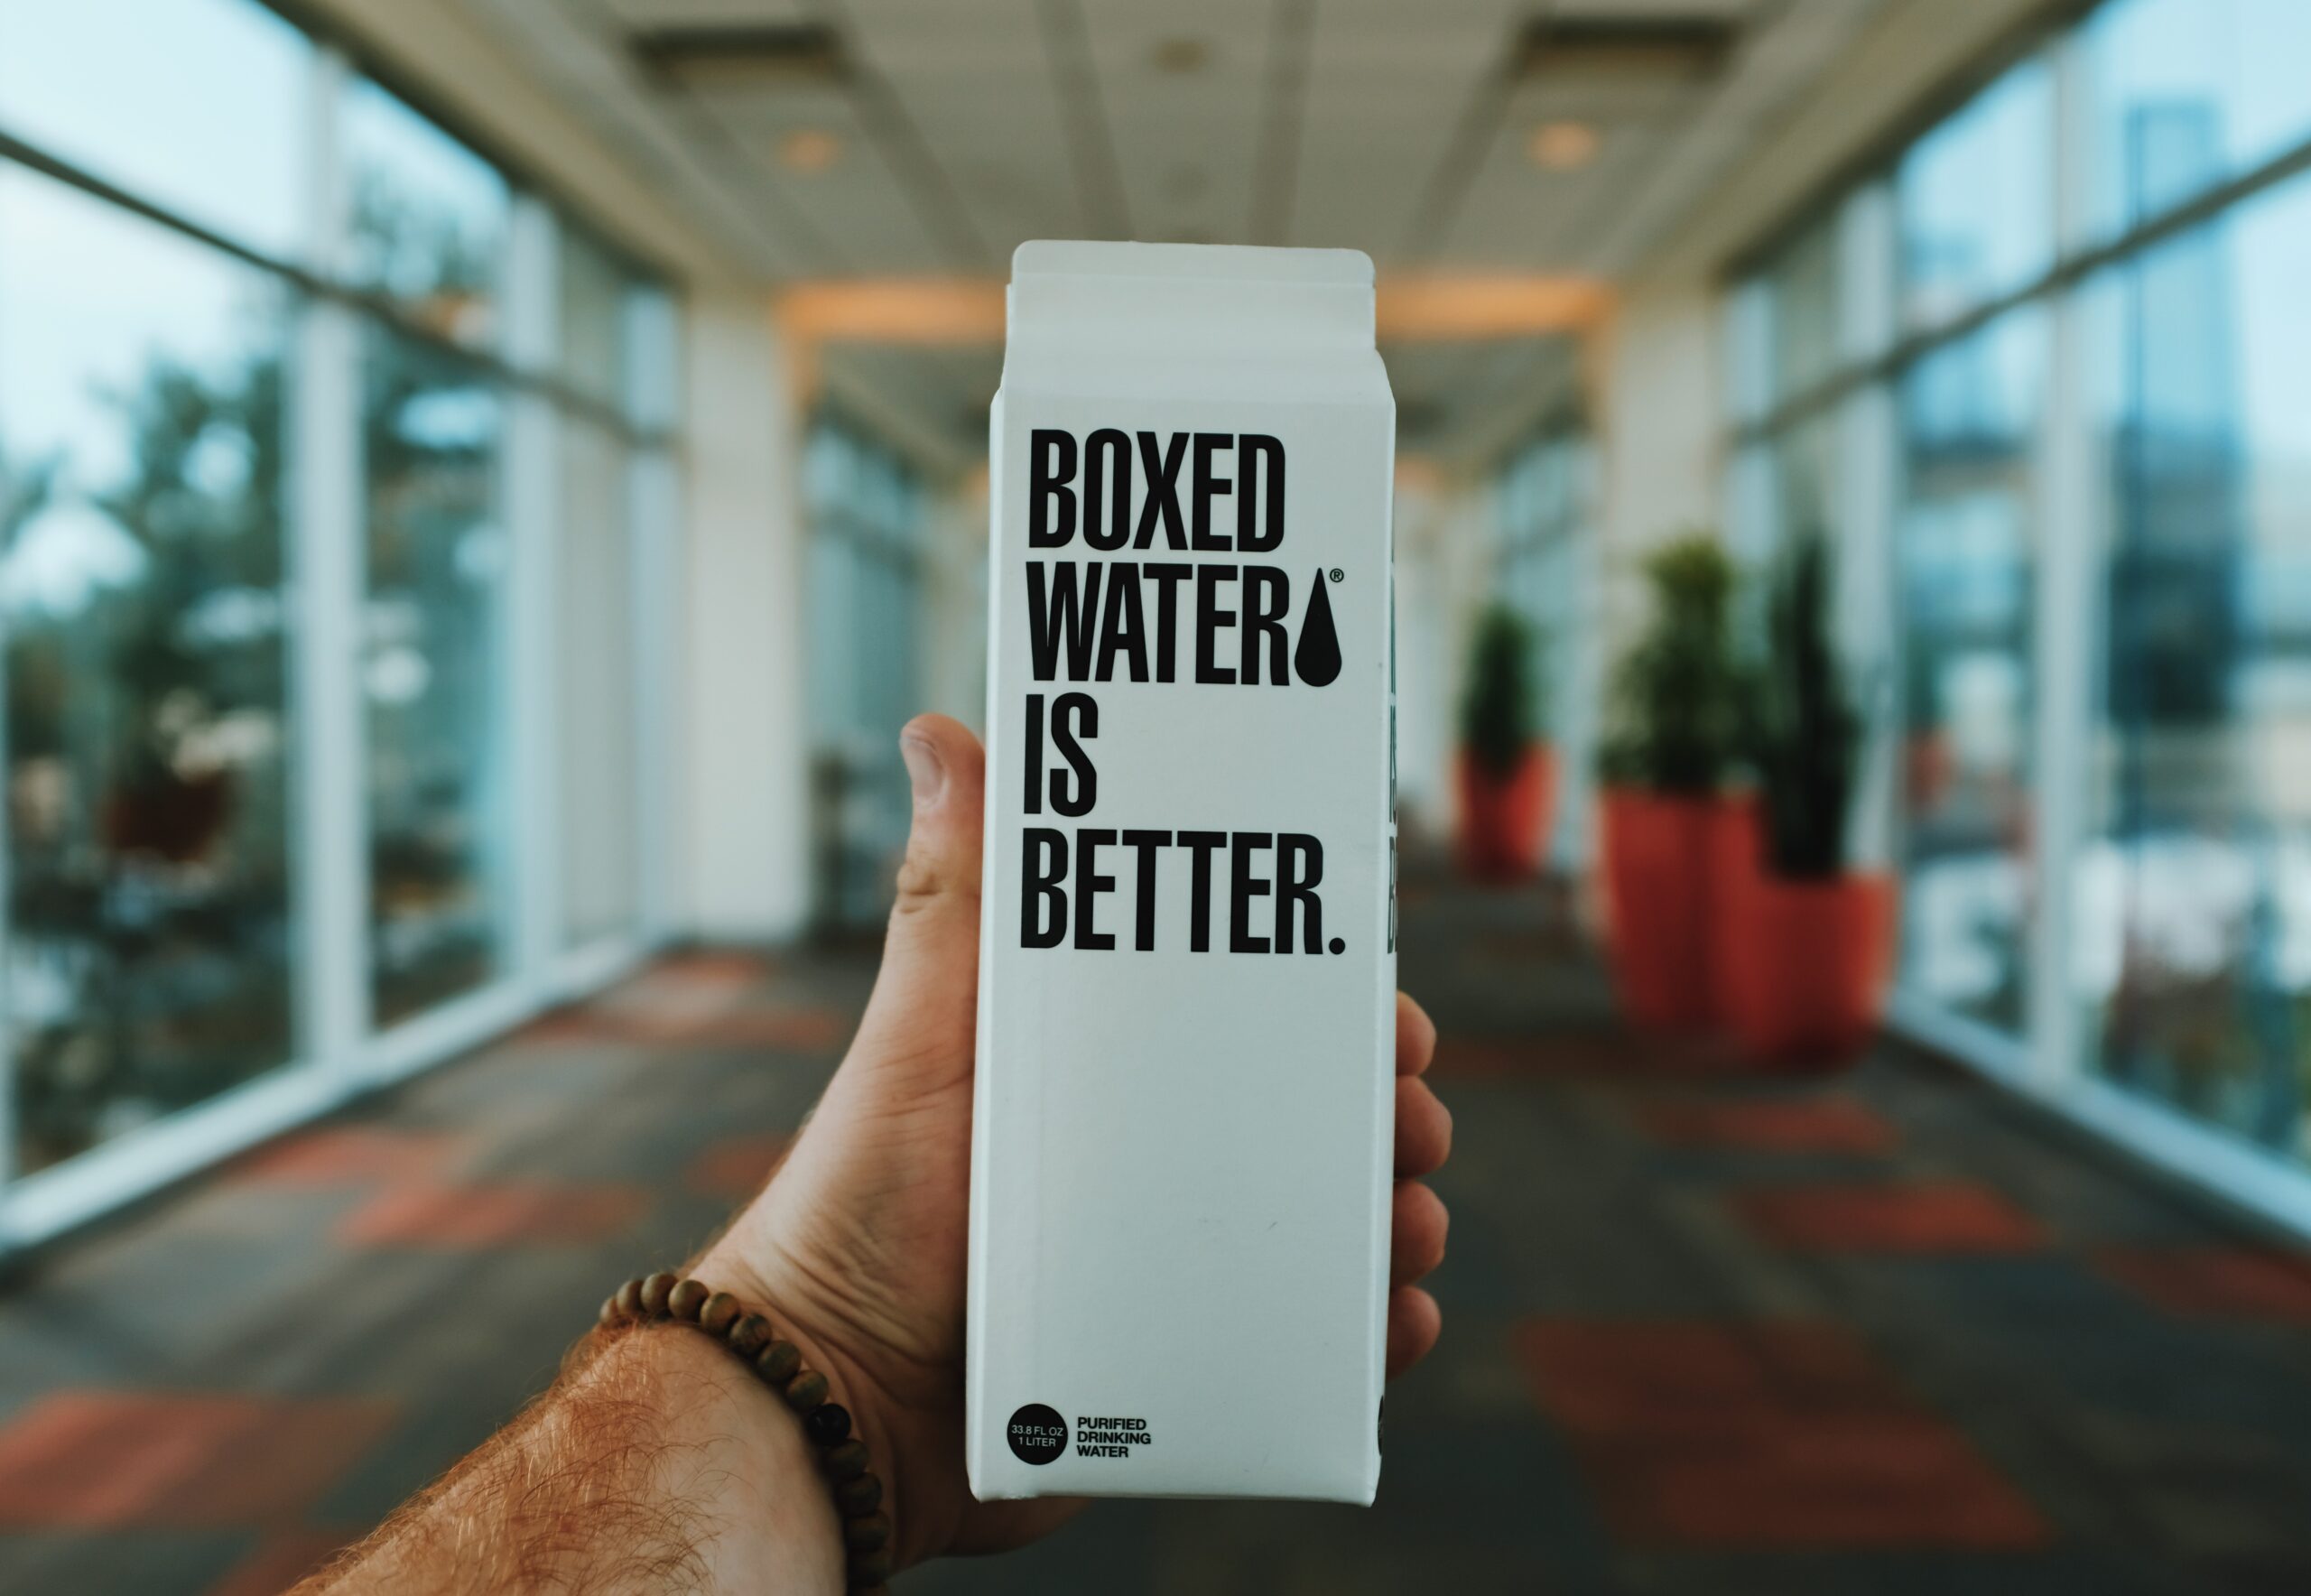 A hand holds Boxed Water, showing a bold statement on the label.